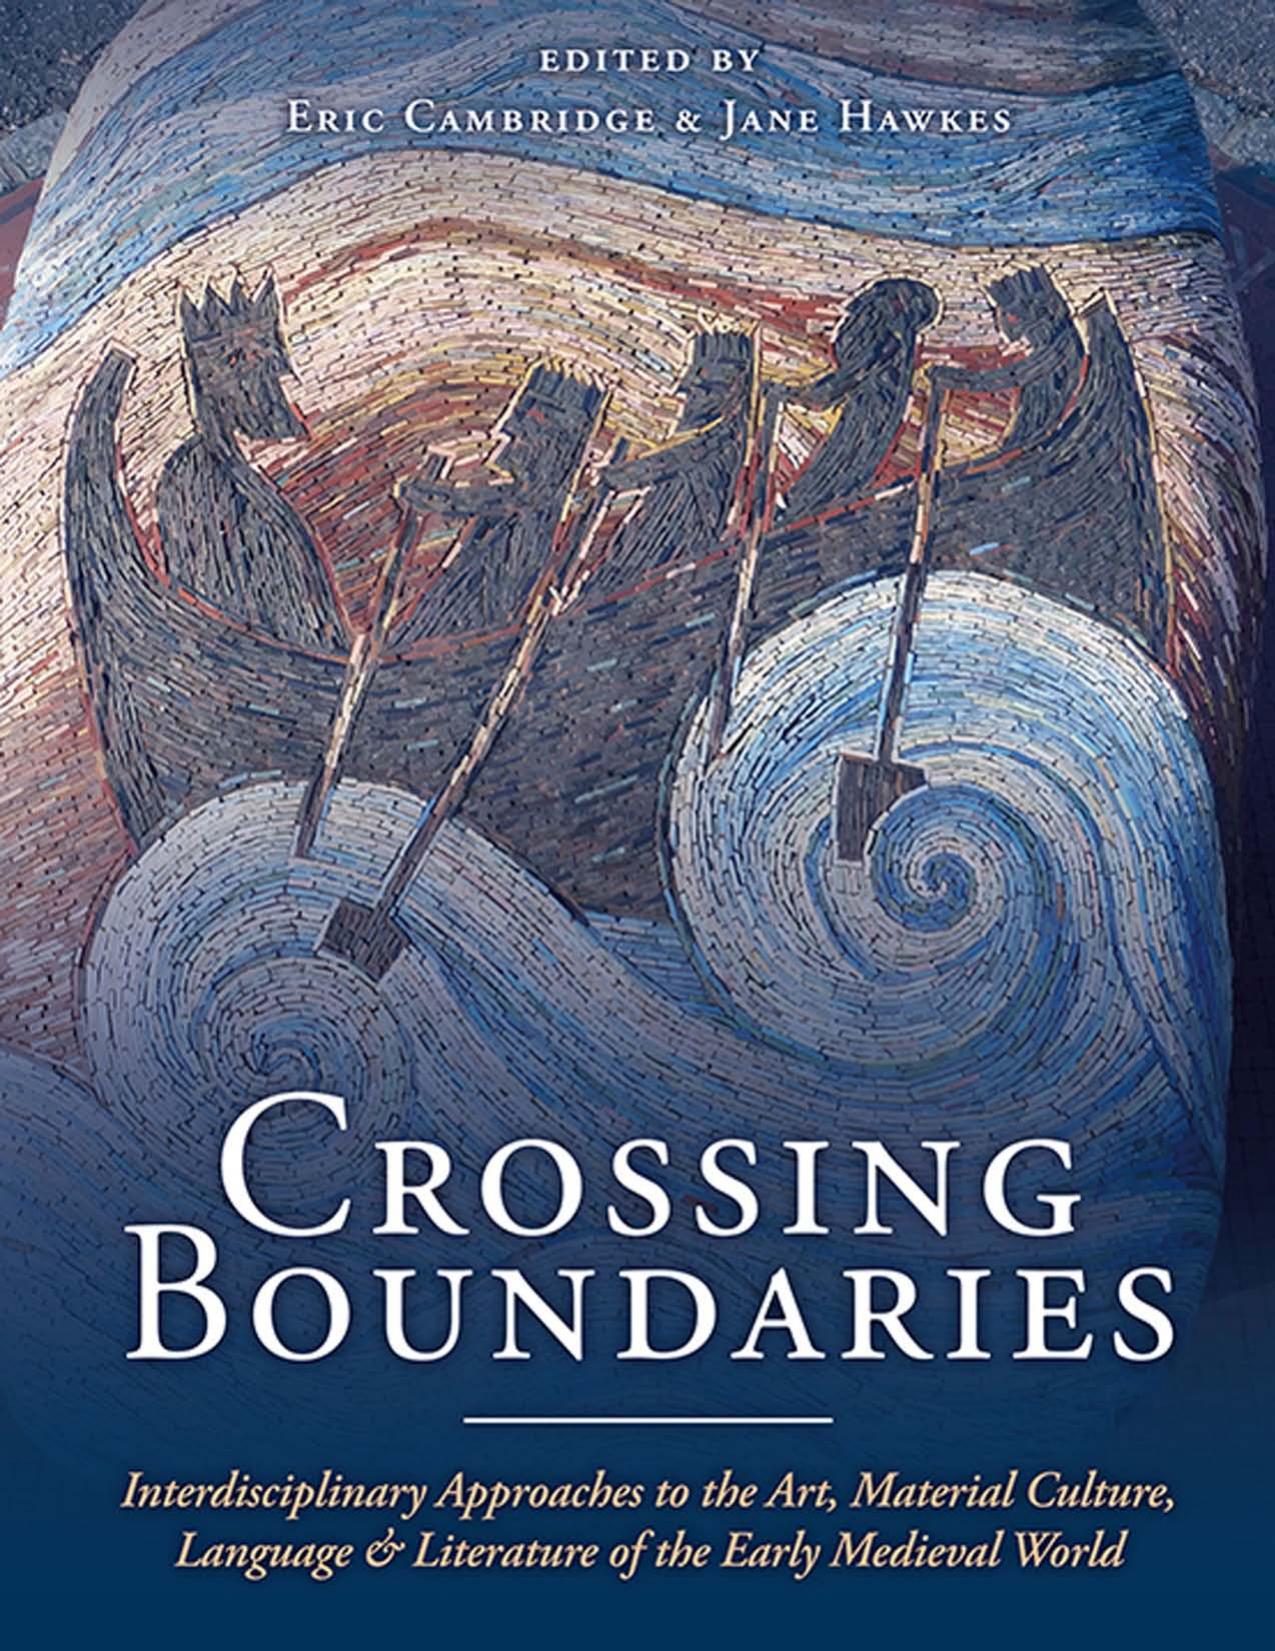 Crossing Boundaries: Interdisciplinary Approaches to the Art, Material Culture, Language and Literature of the Early Medieval World